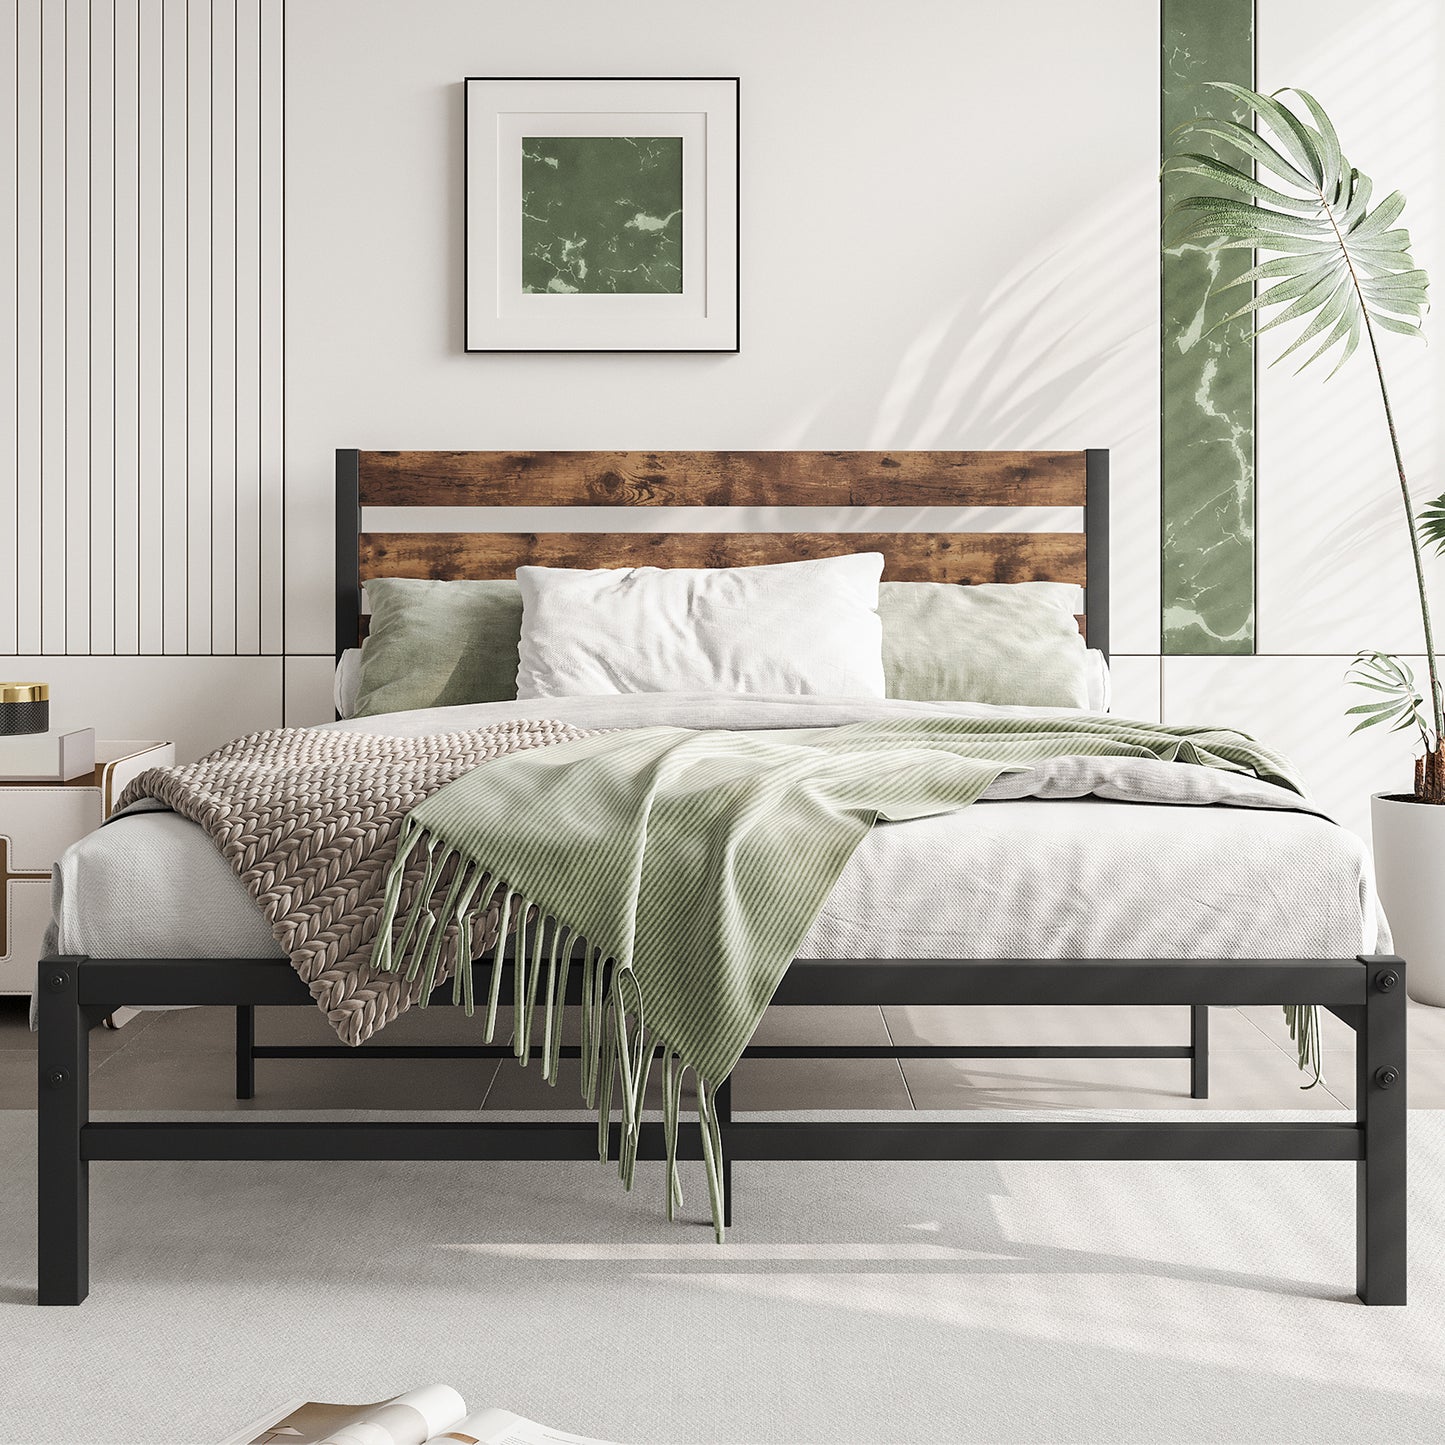 SYNGAR Black Full Size Bed Frame with Wooden Industrial Headboard and Footboard, Iron Platform Bed Frame Full Metal Bed Bedroom Furniture with 1100LBS Capacity, No Box Spring Needed, Noise Free